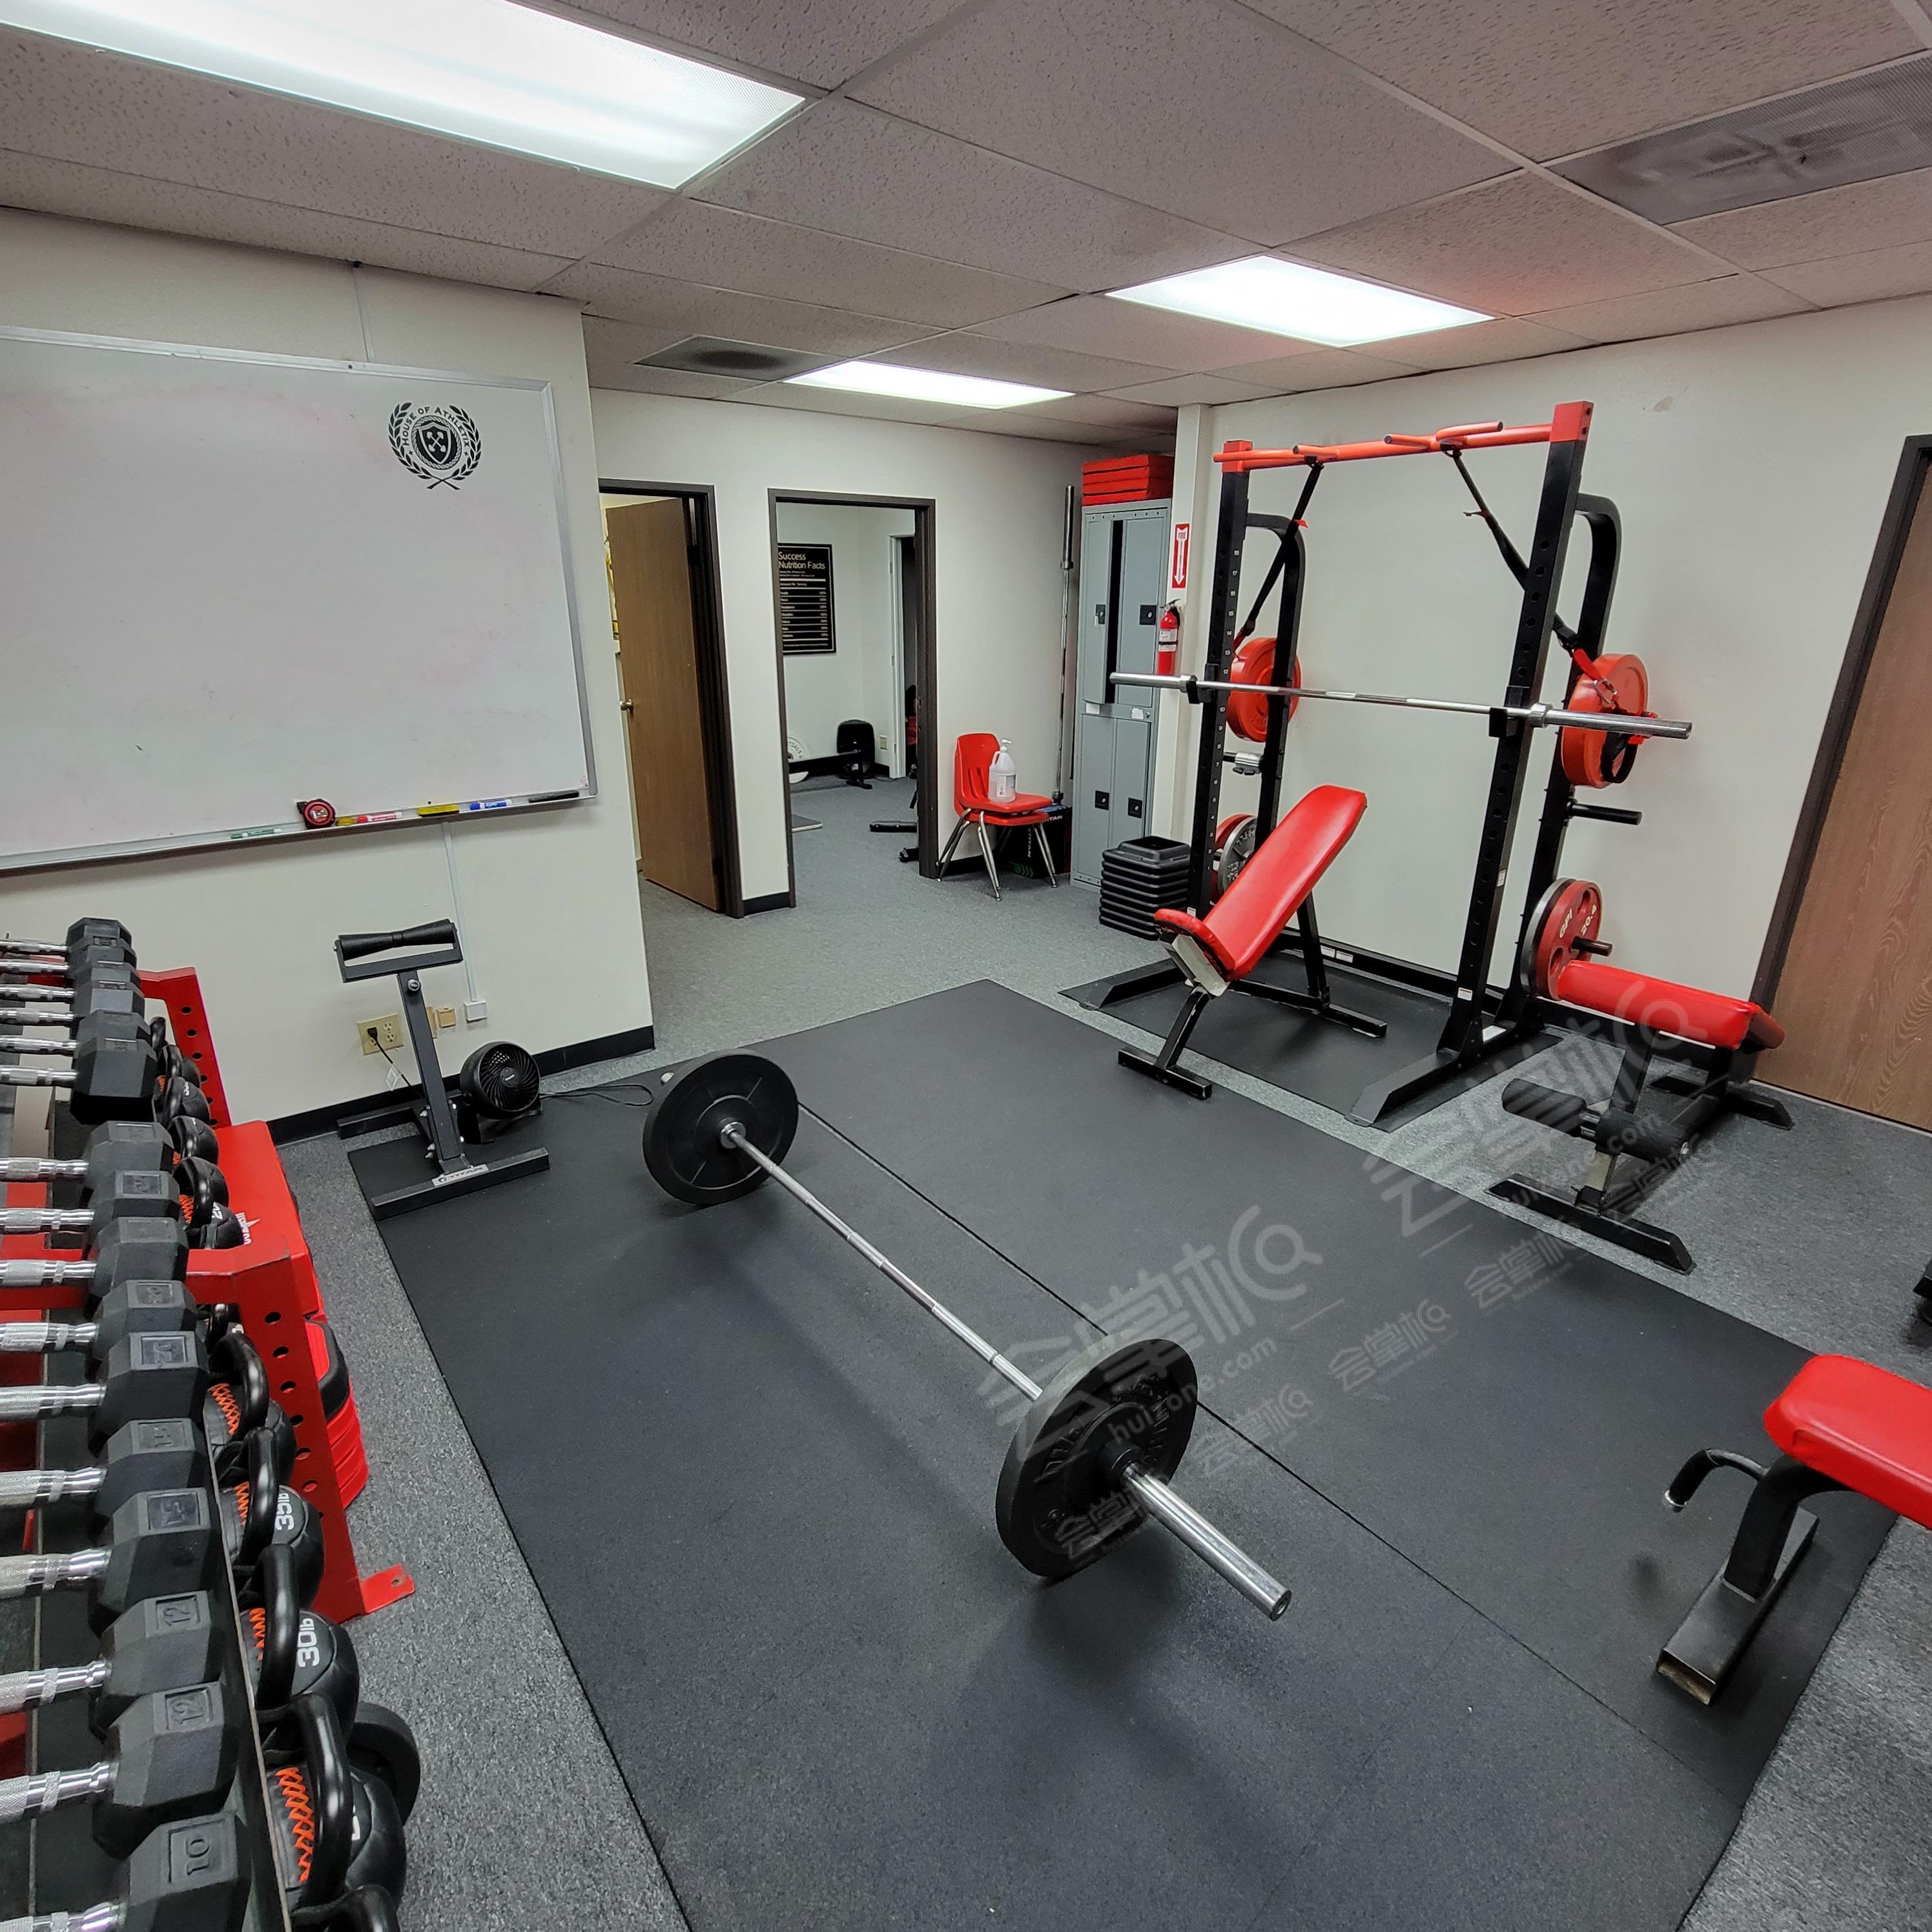 Signal Hill (Long Beach) Private Fitness Studio - Personal Training & Small Fitness Classes